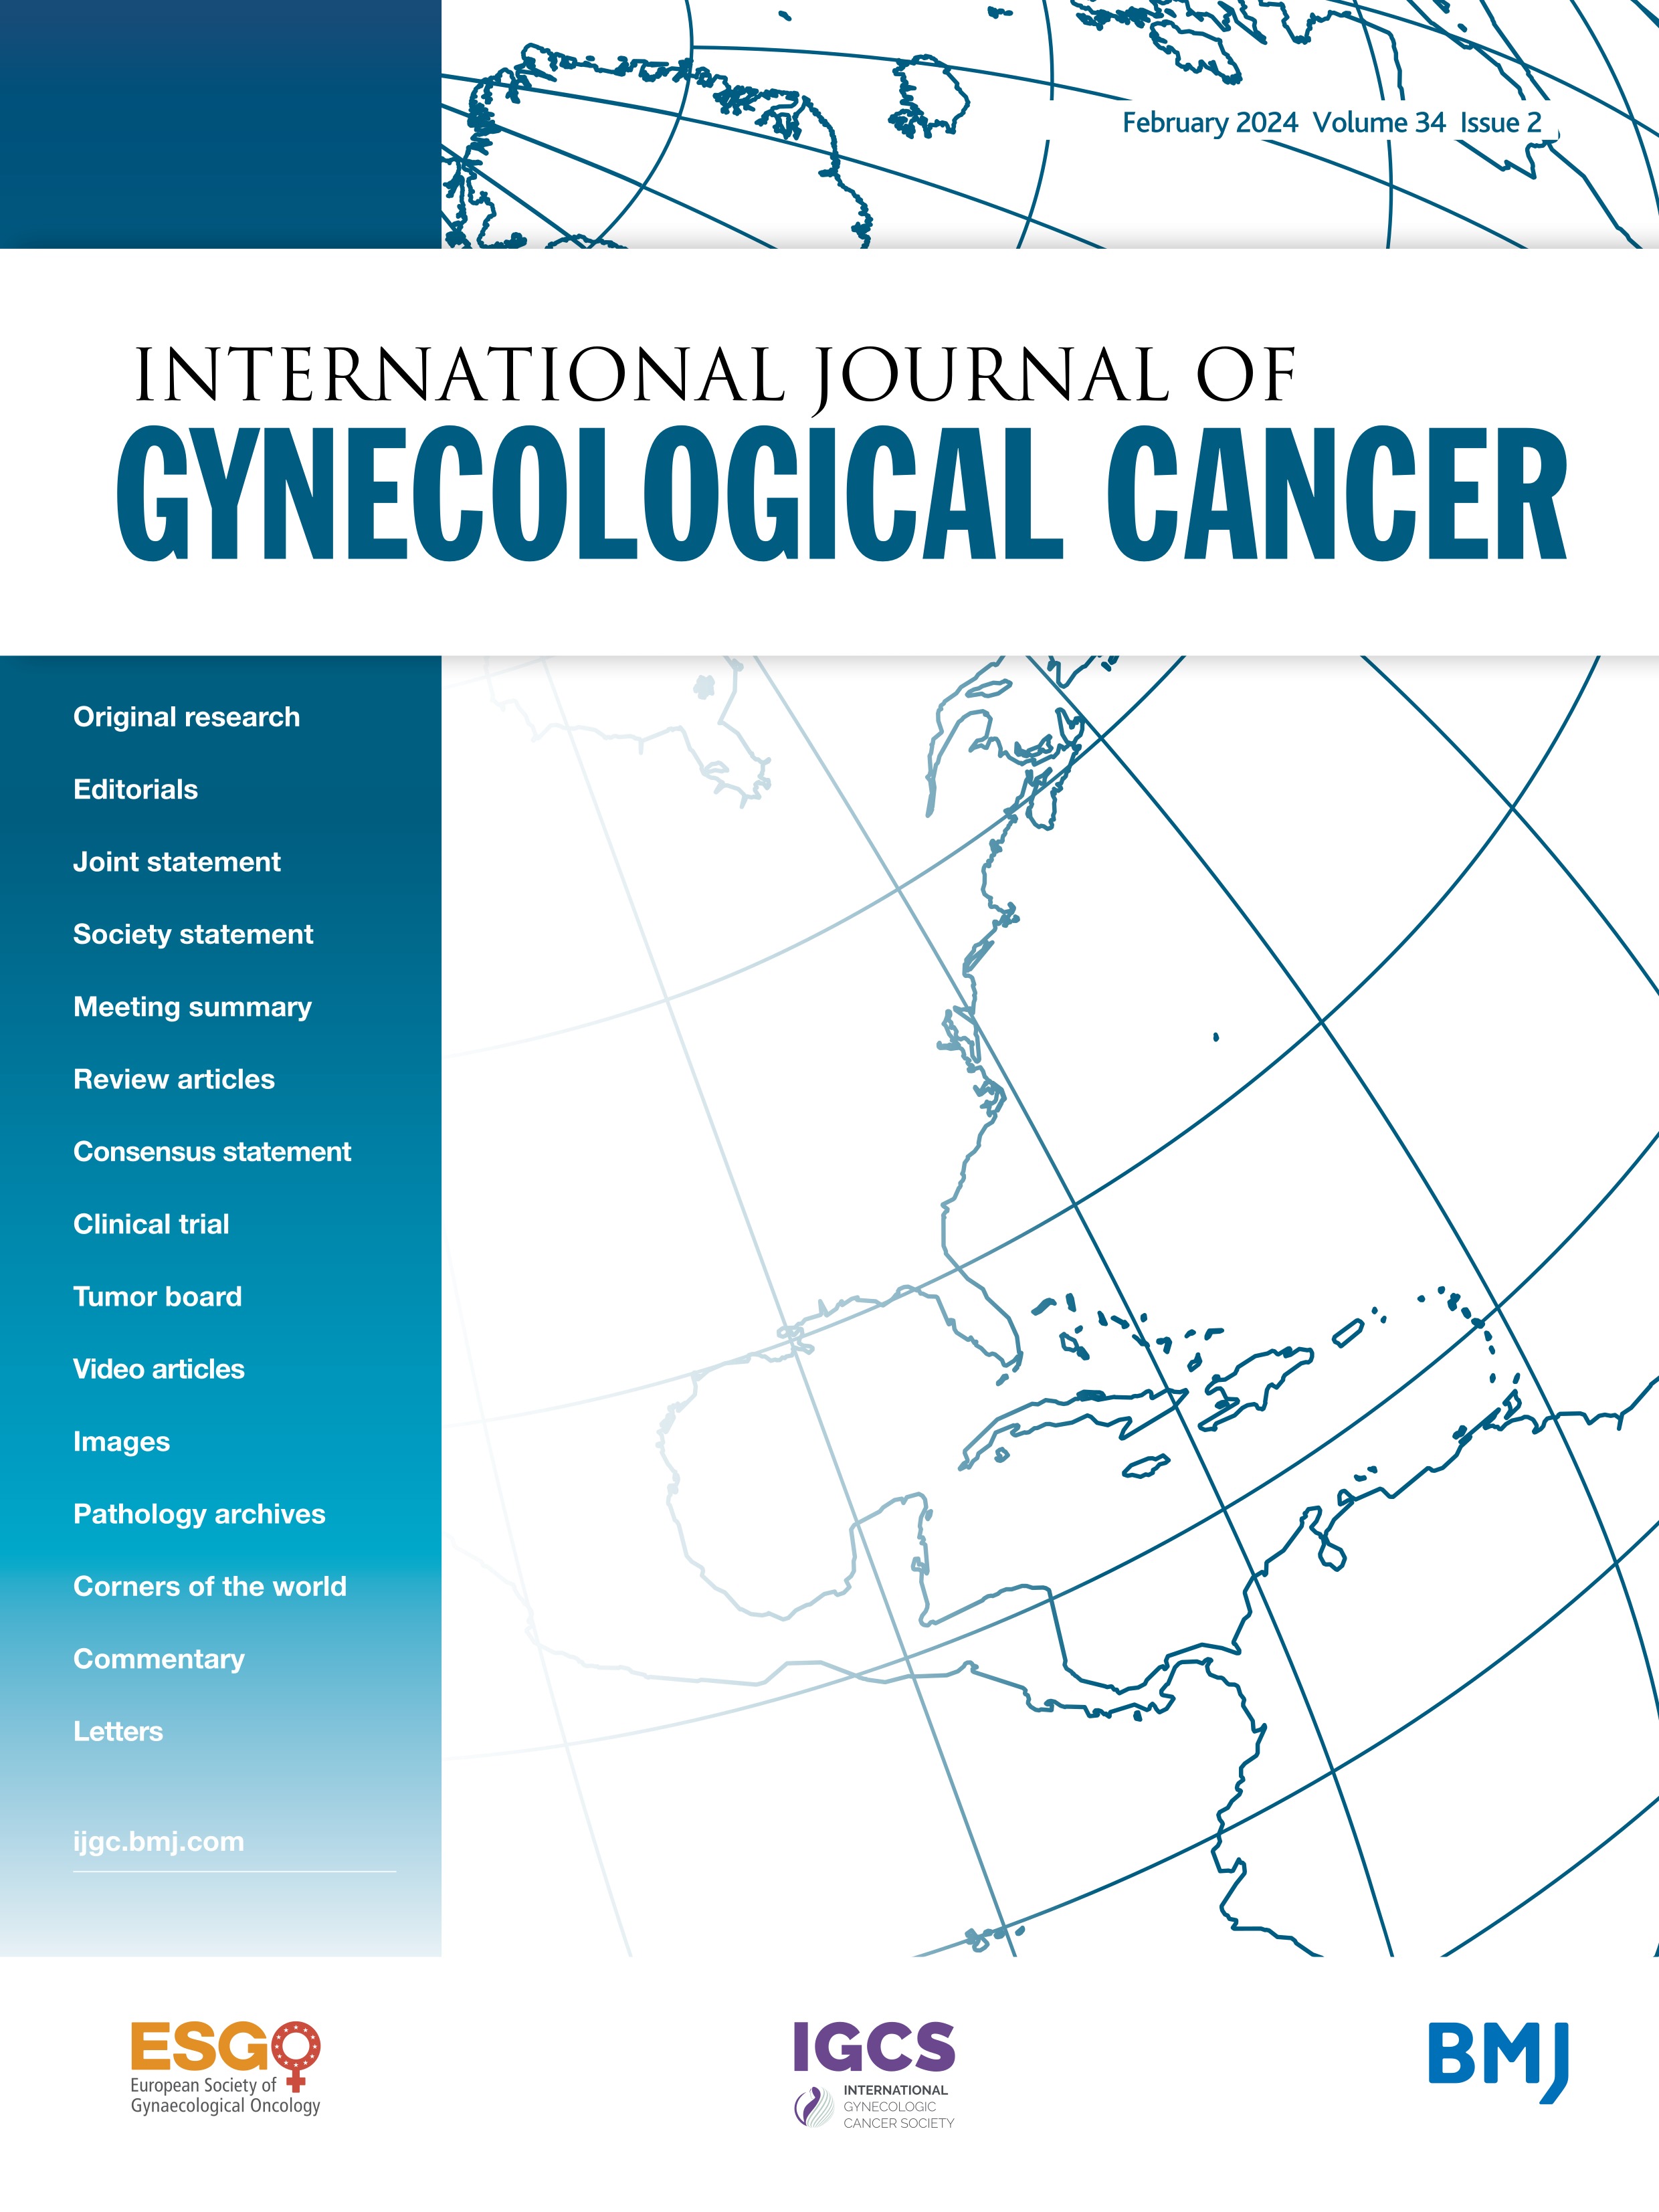 The microbiome and gynecologic cancer: cellular mechanisms and clinical applications